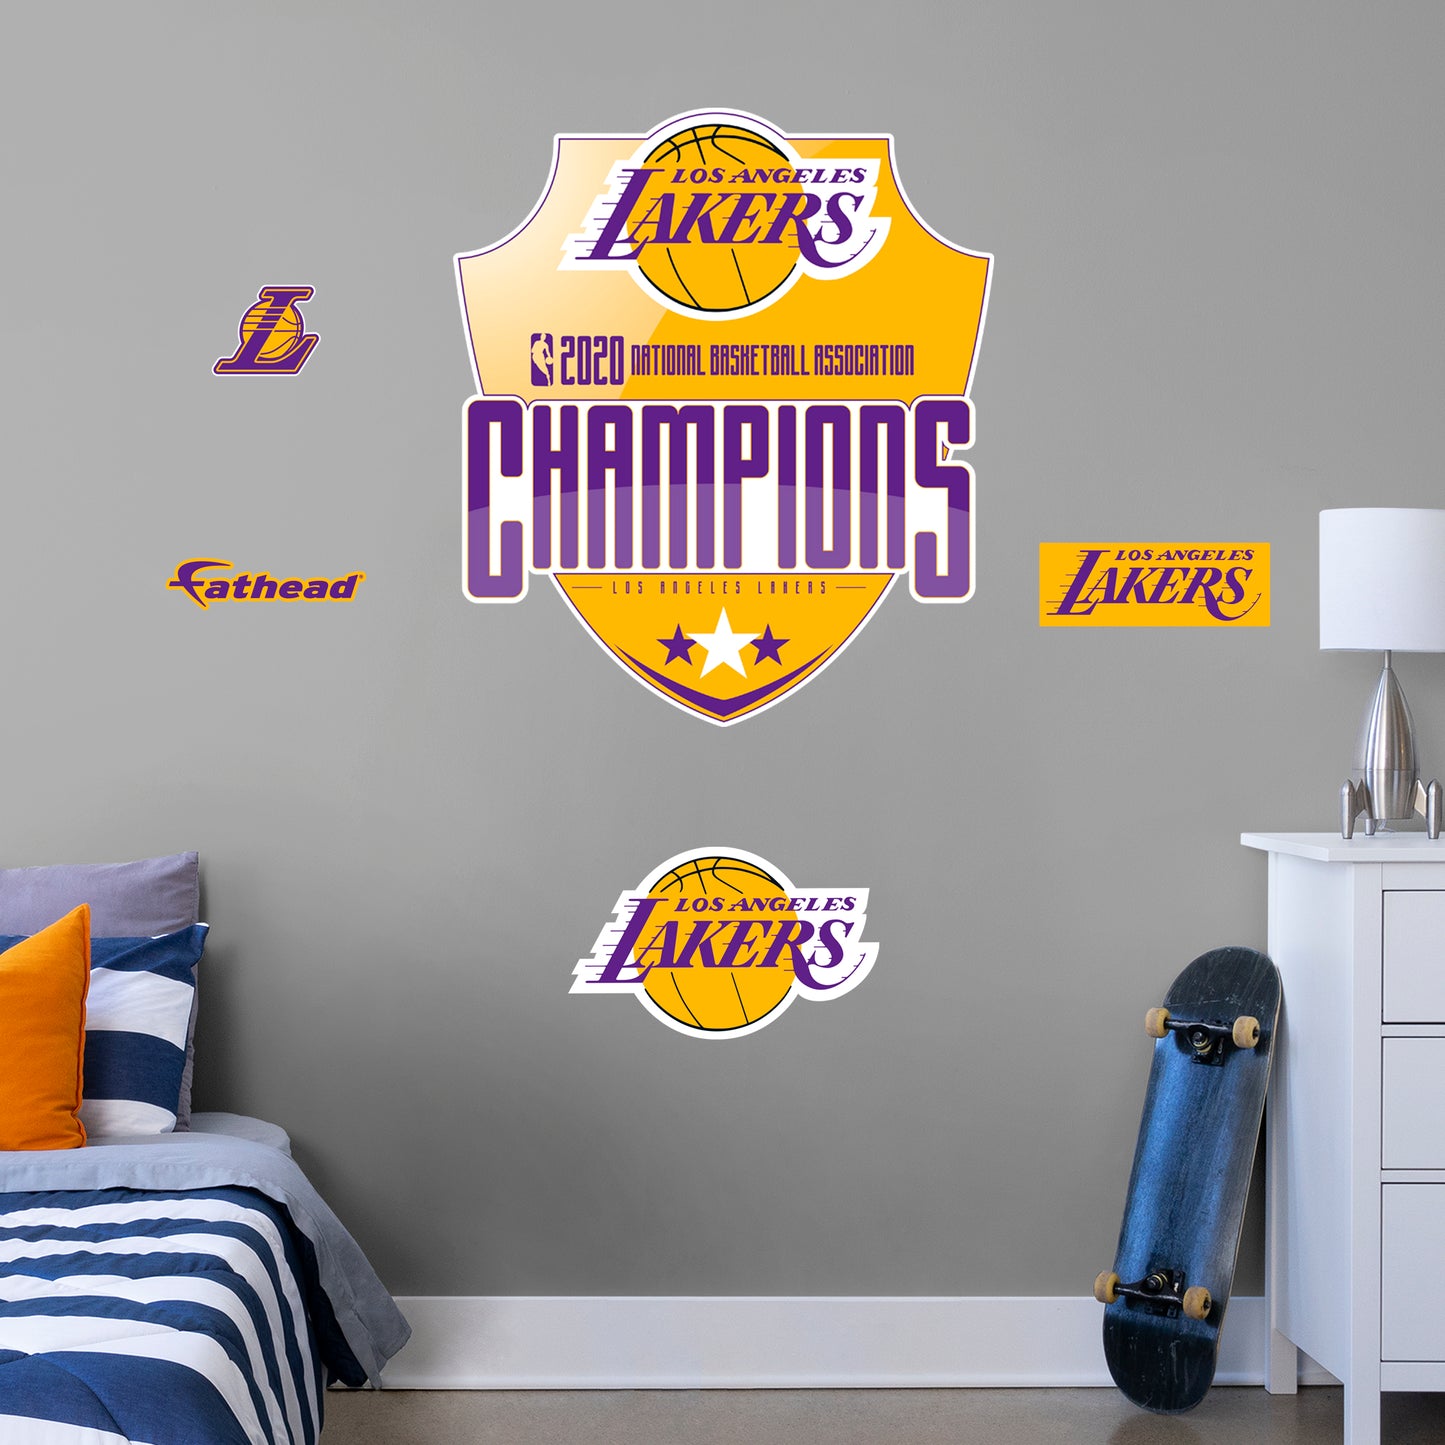 Los Angeles Lakers: 2020 Champions RealBig Logo - Officially Licensed NBA Removable Wall Decal